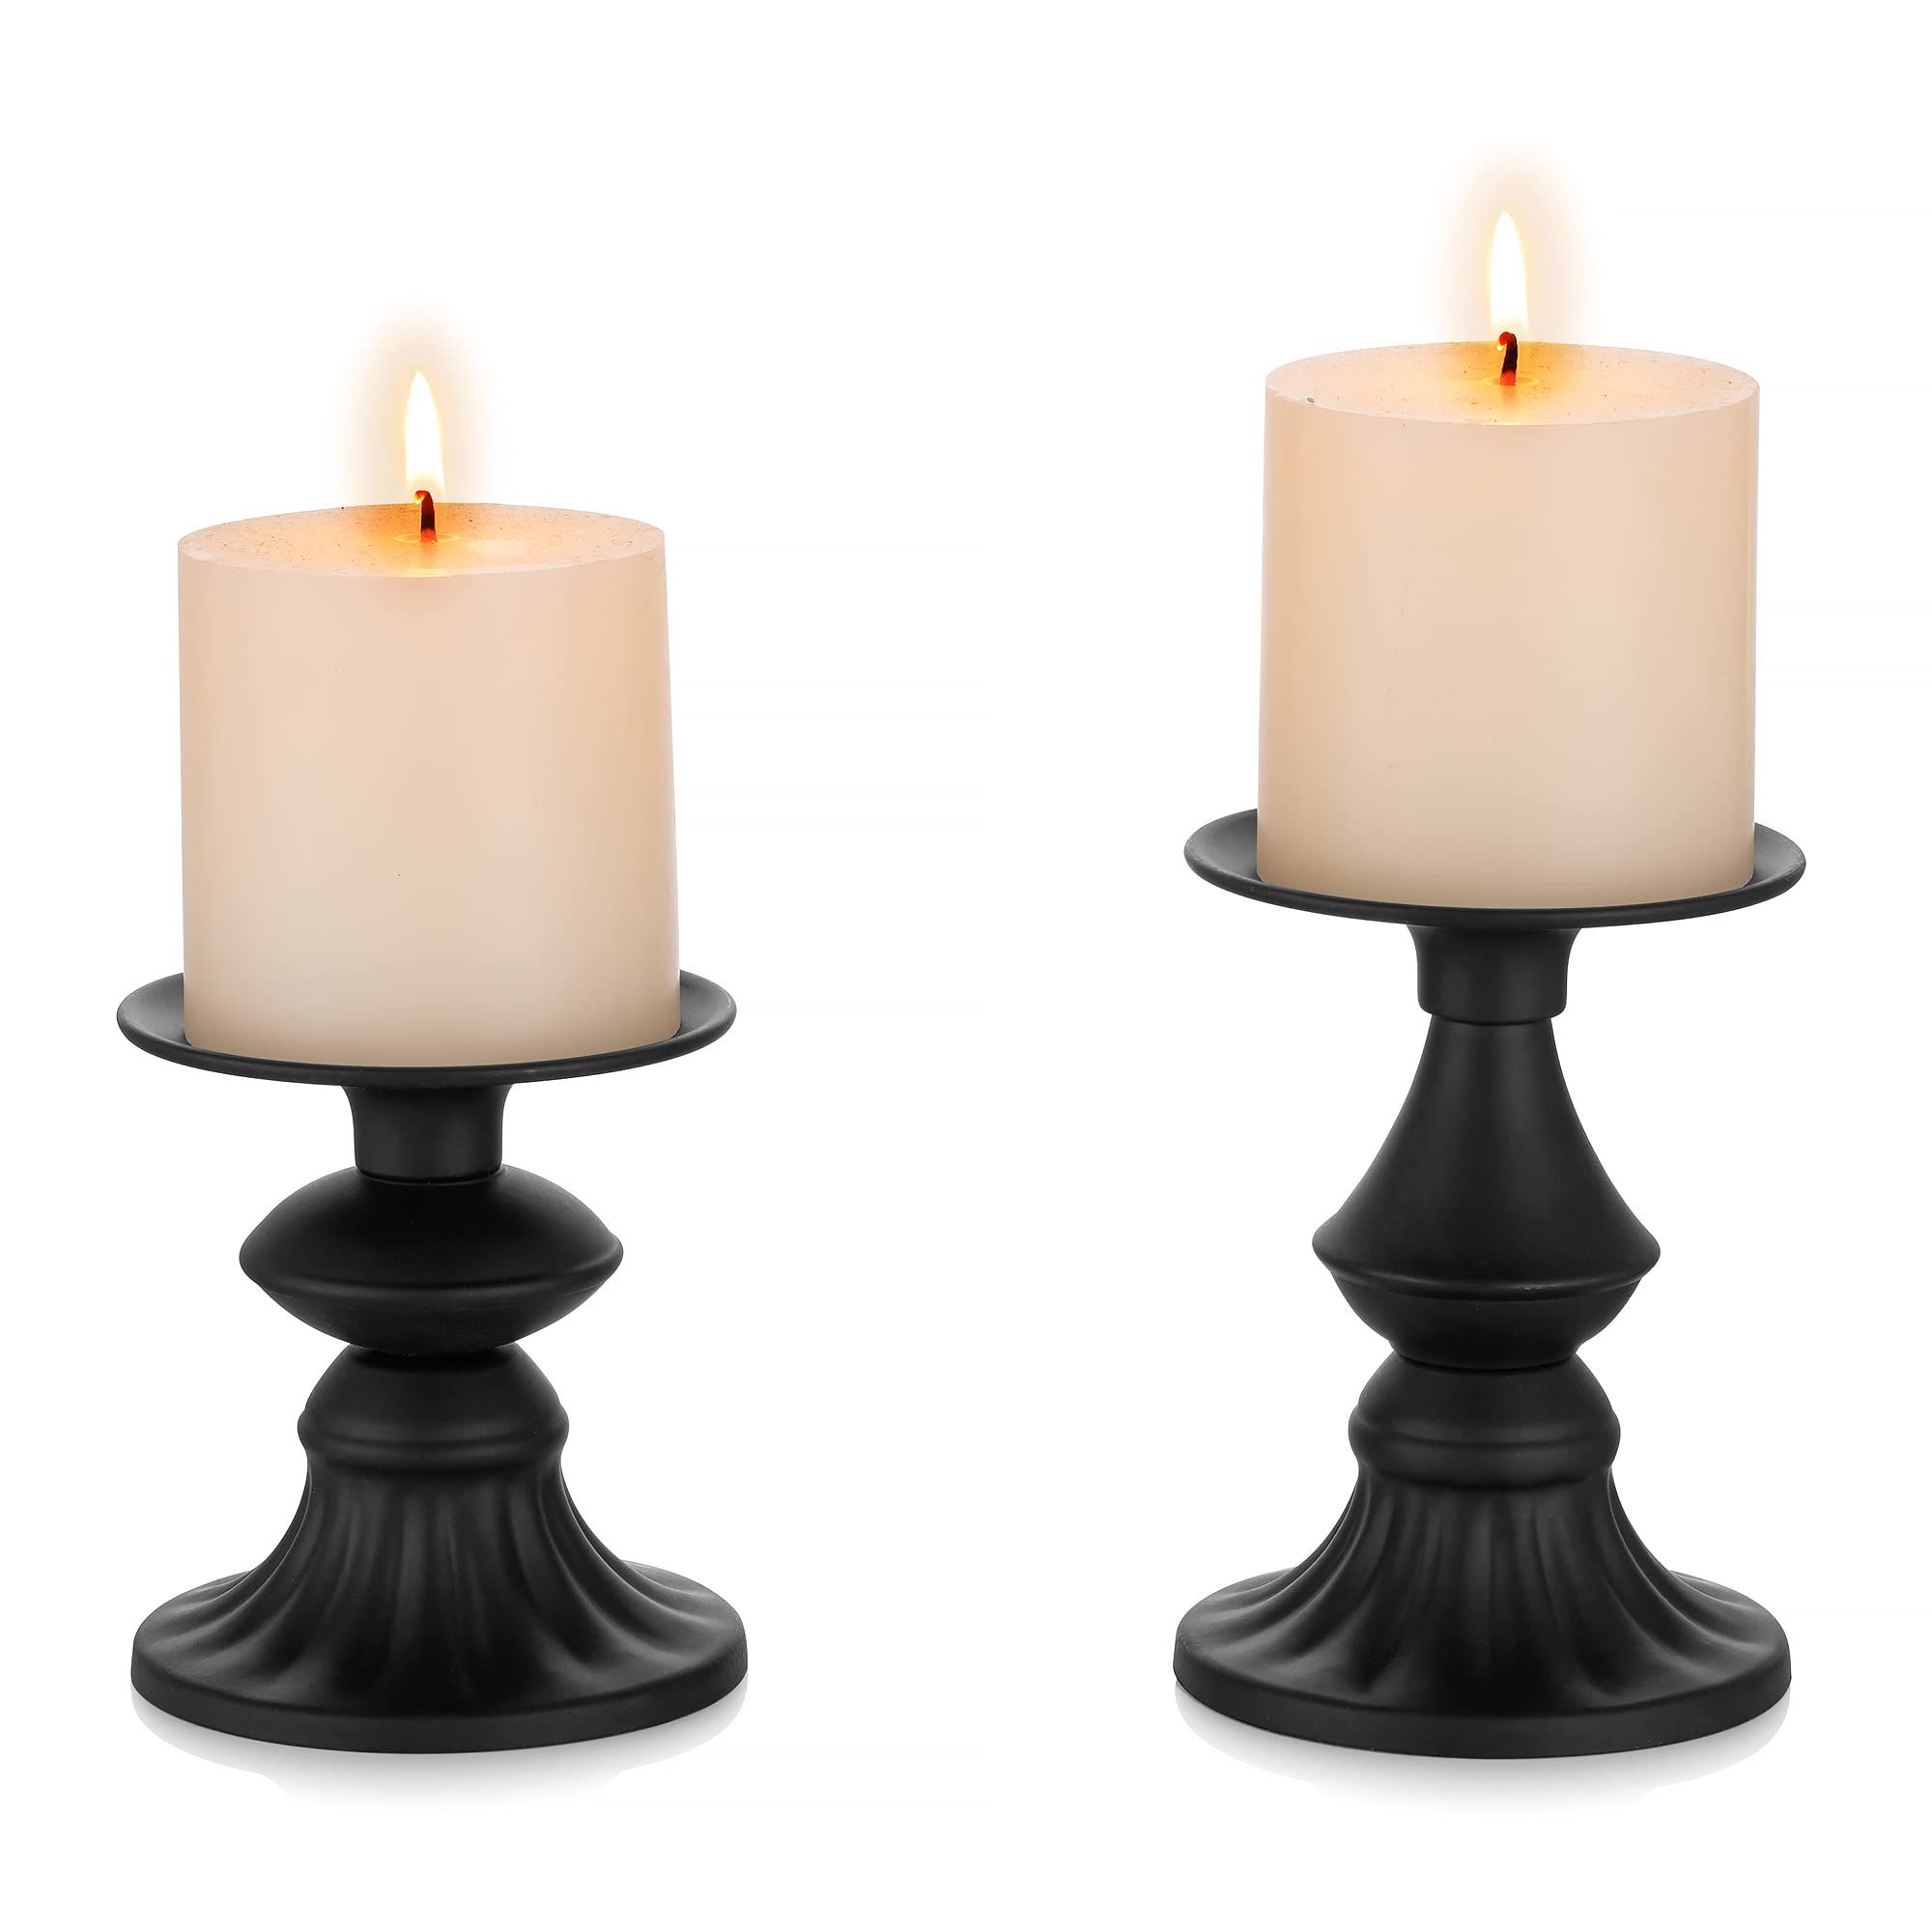 Romadedi Candle Holders for Pillar Candles - Matte Black Candle Stands, Vintage Candlestick Holder f | Amazon (US)